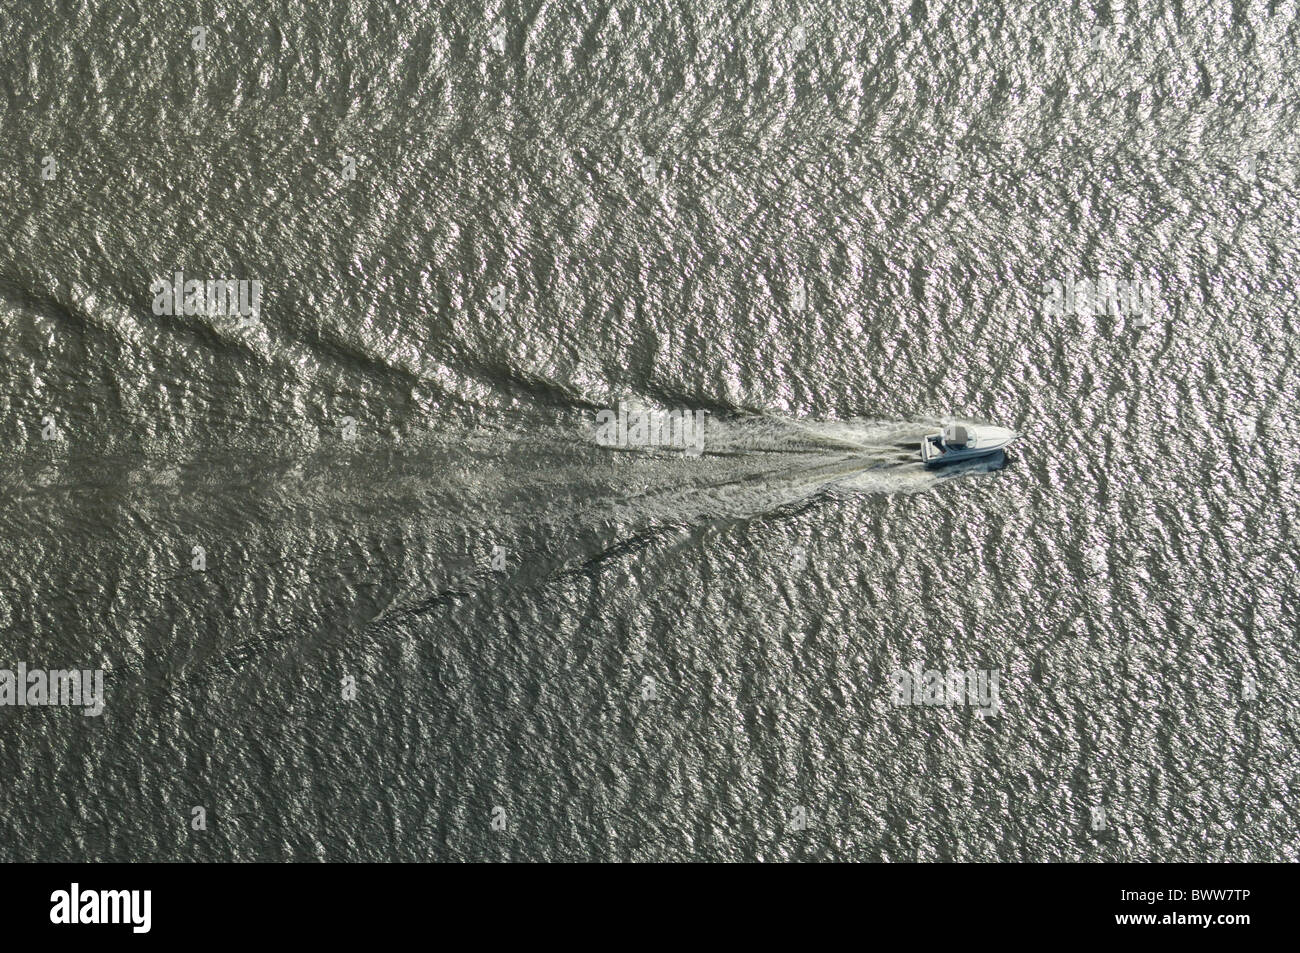 Surface waves created by a speed boat on Hudson river, New York, USA Stock Photo